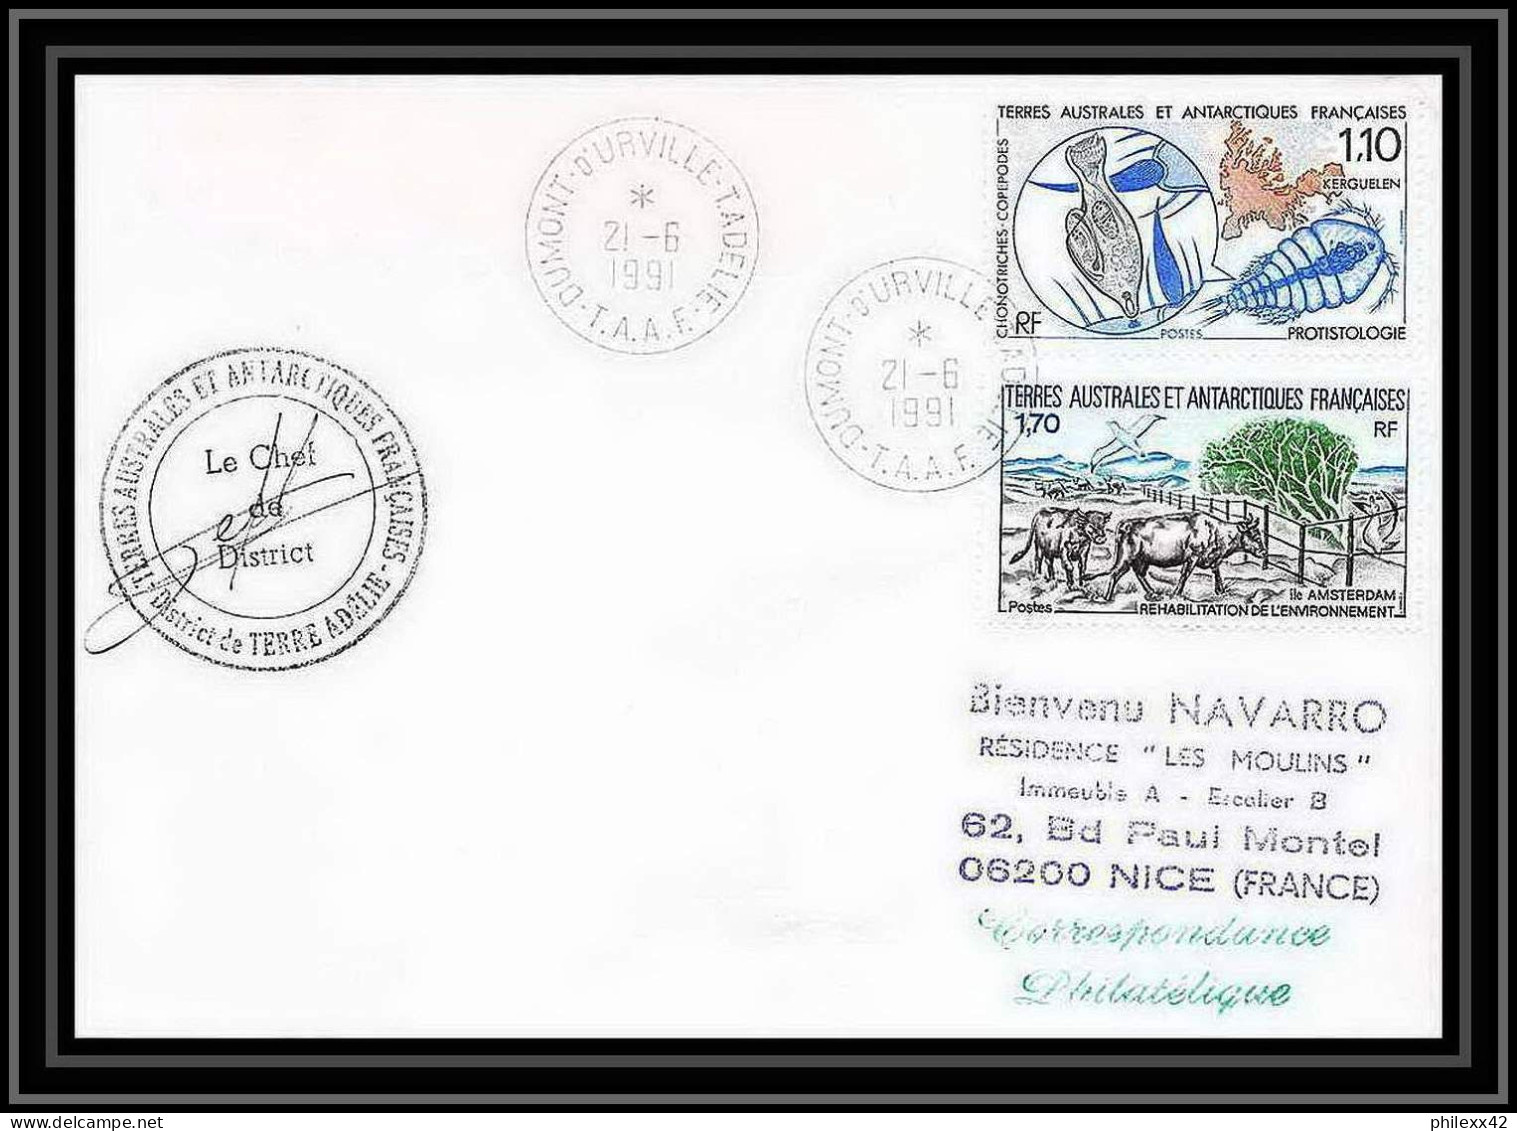 1749 Terre Adelie 21/6/1991 Midwinter TAAF Antarctic Terres Australes Lettre (cover) - Covers & Documents